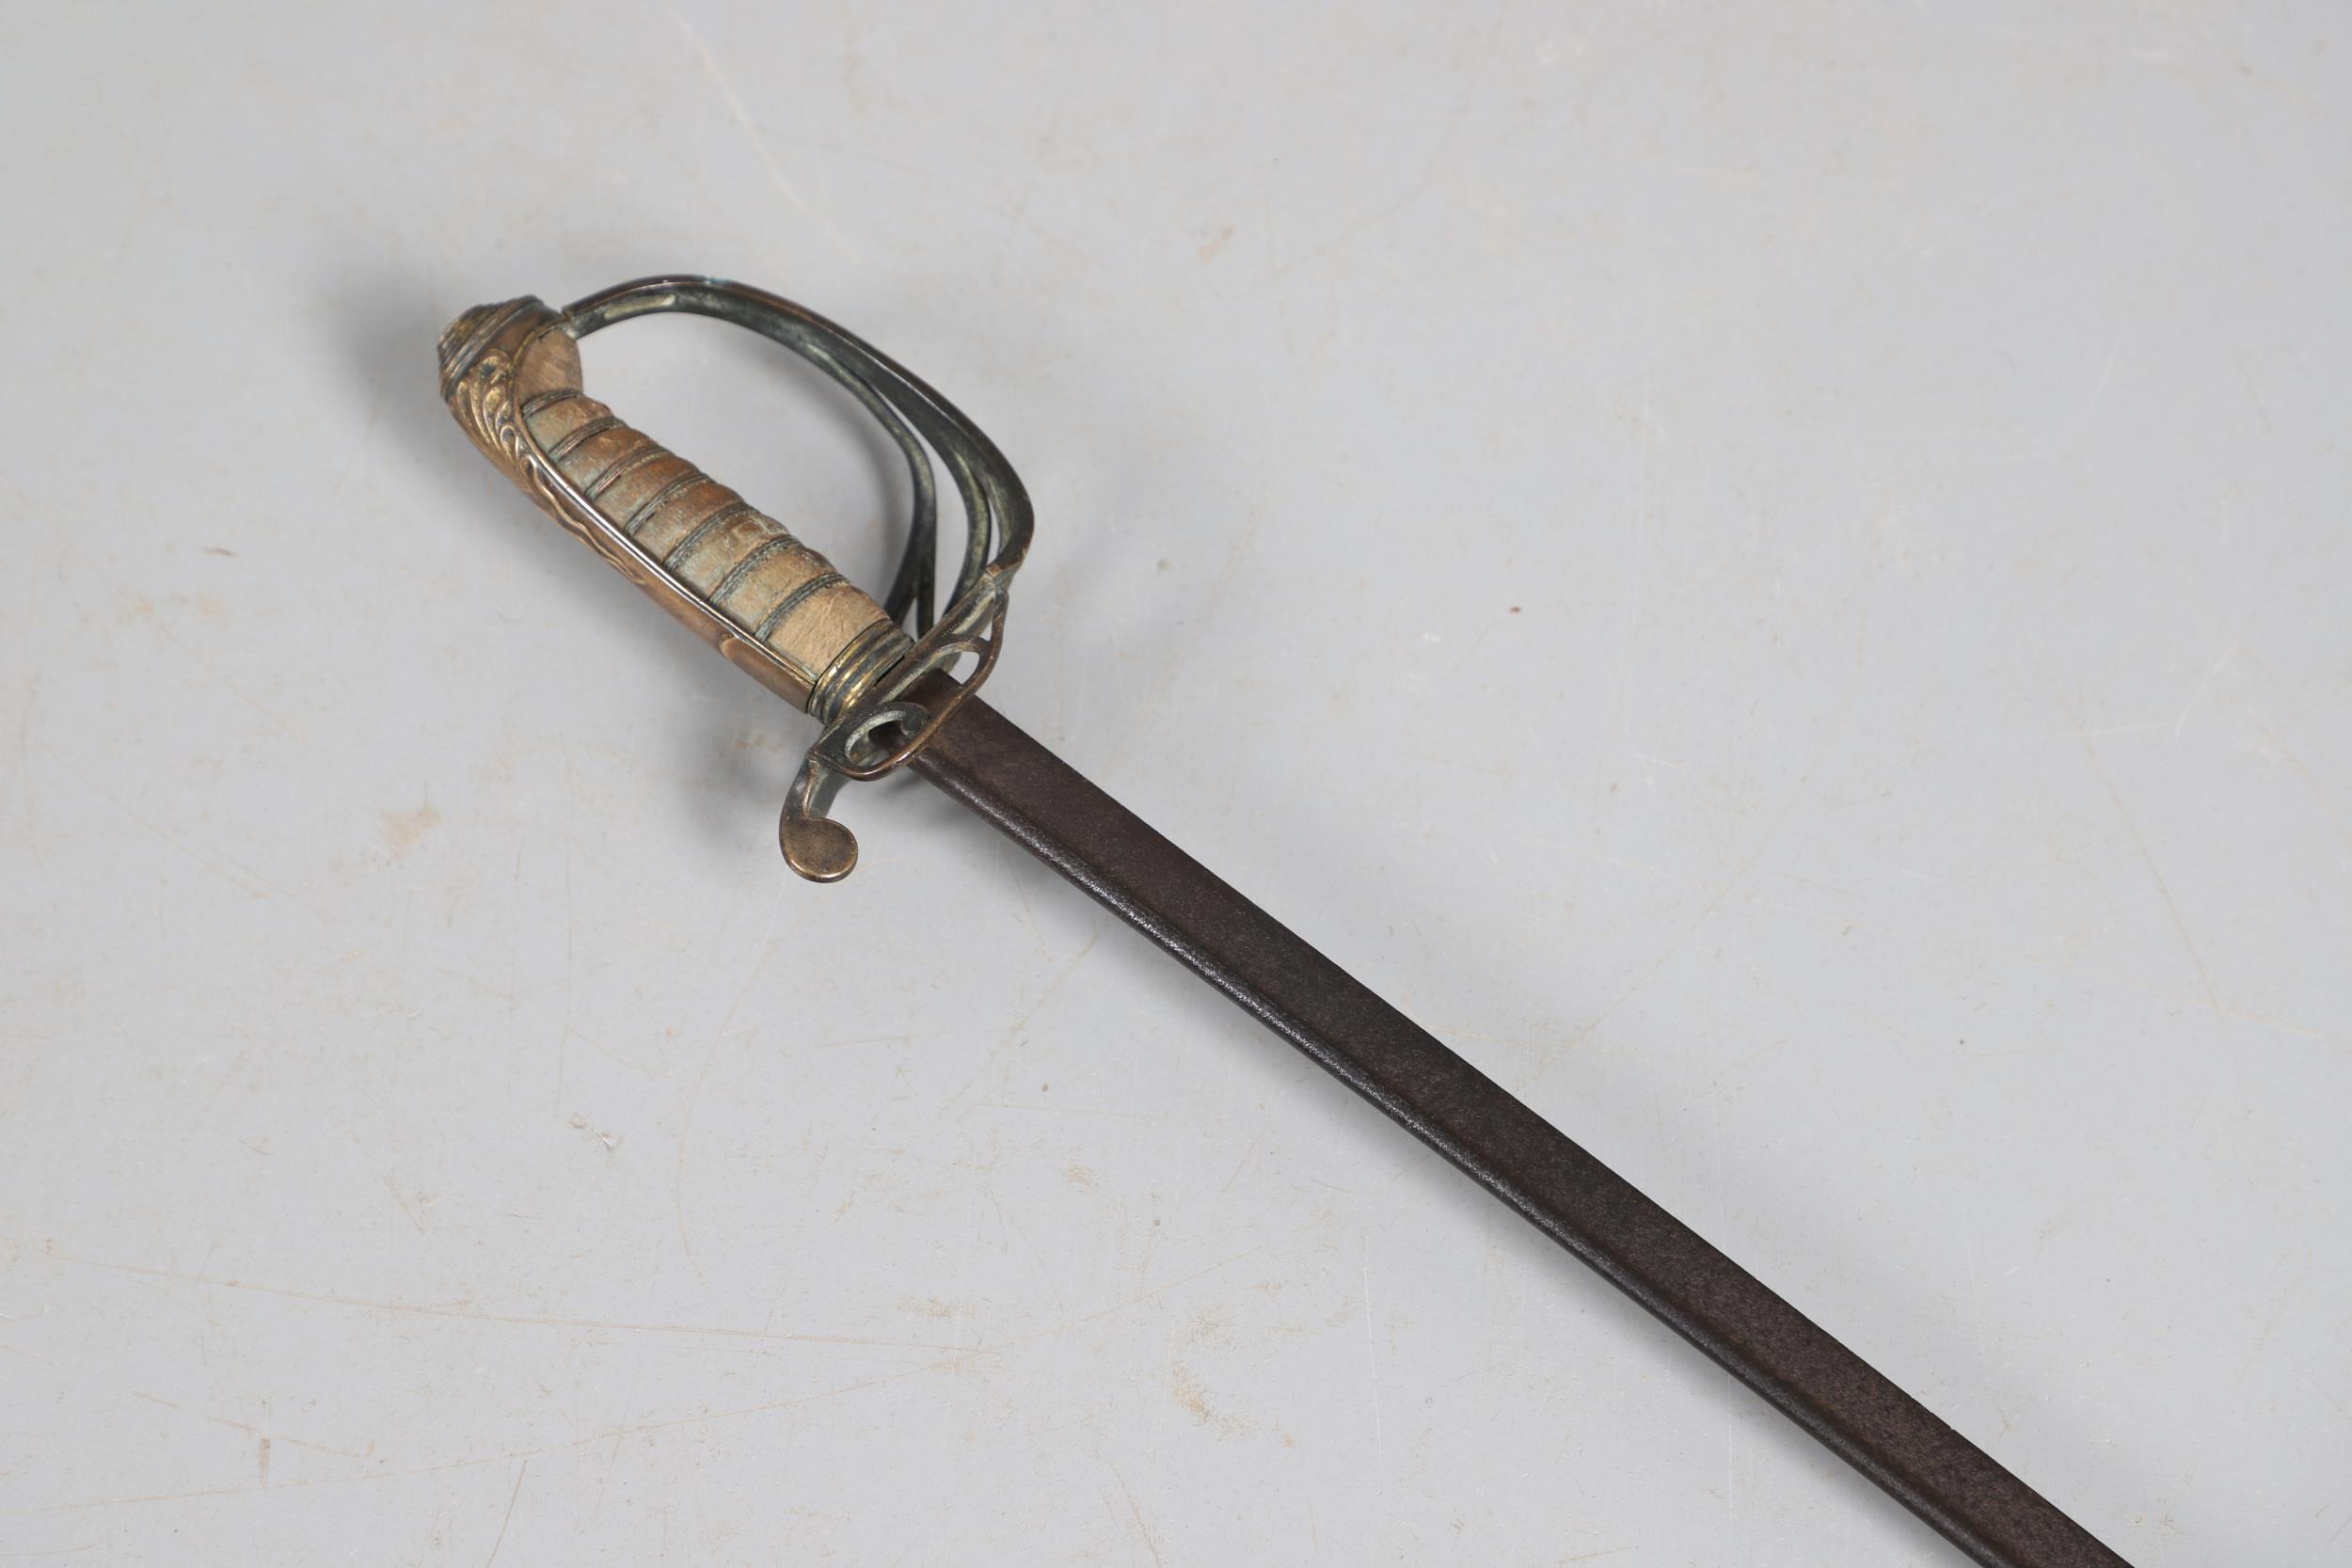 AN EAST INDIA COMPANY OFFICER'S 1822 PATTERN SWORD. - Image 8 of 10